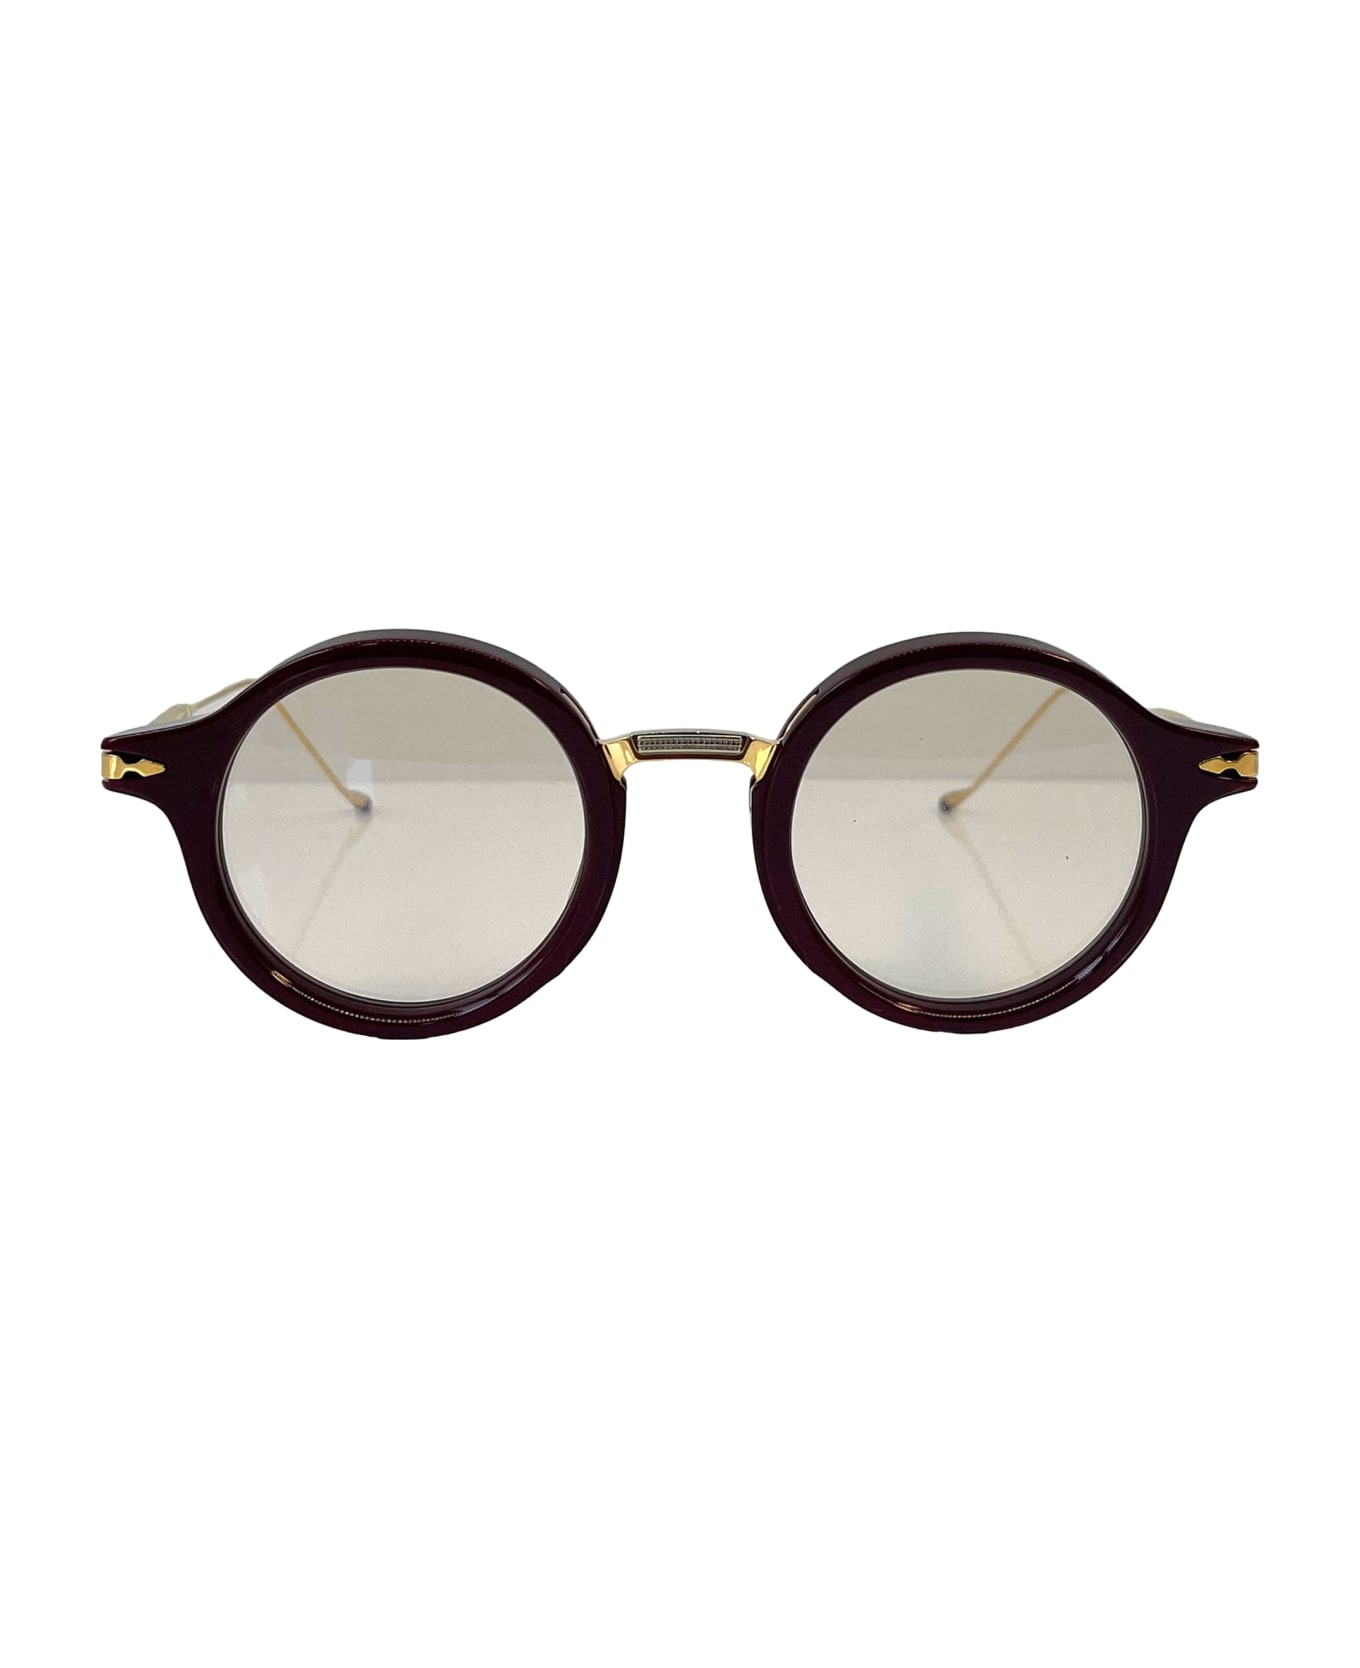 Jacques Marie Mage Norman - Reserve Rx Glasses - burgundy アイウェア